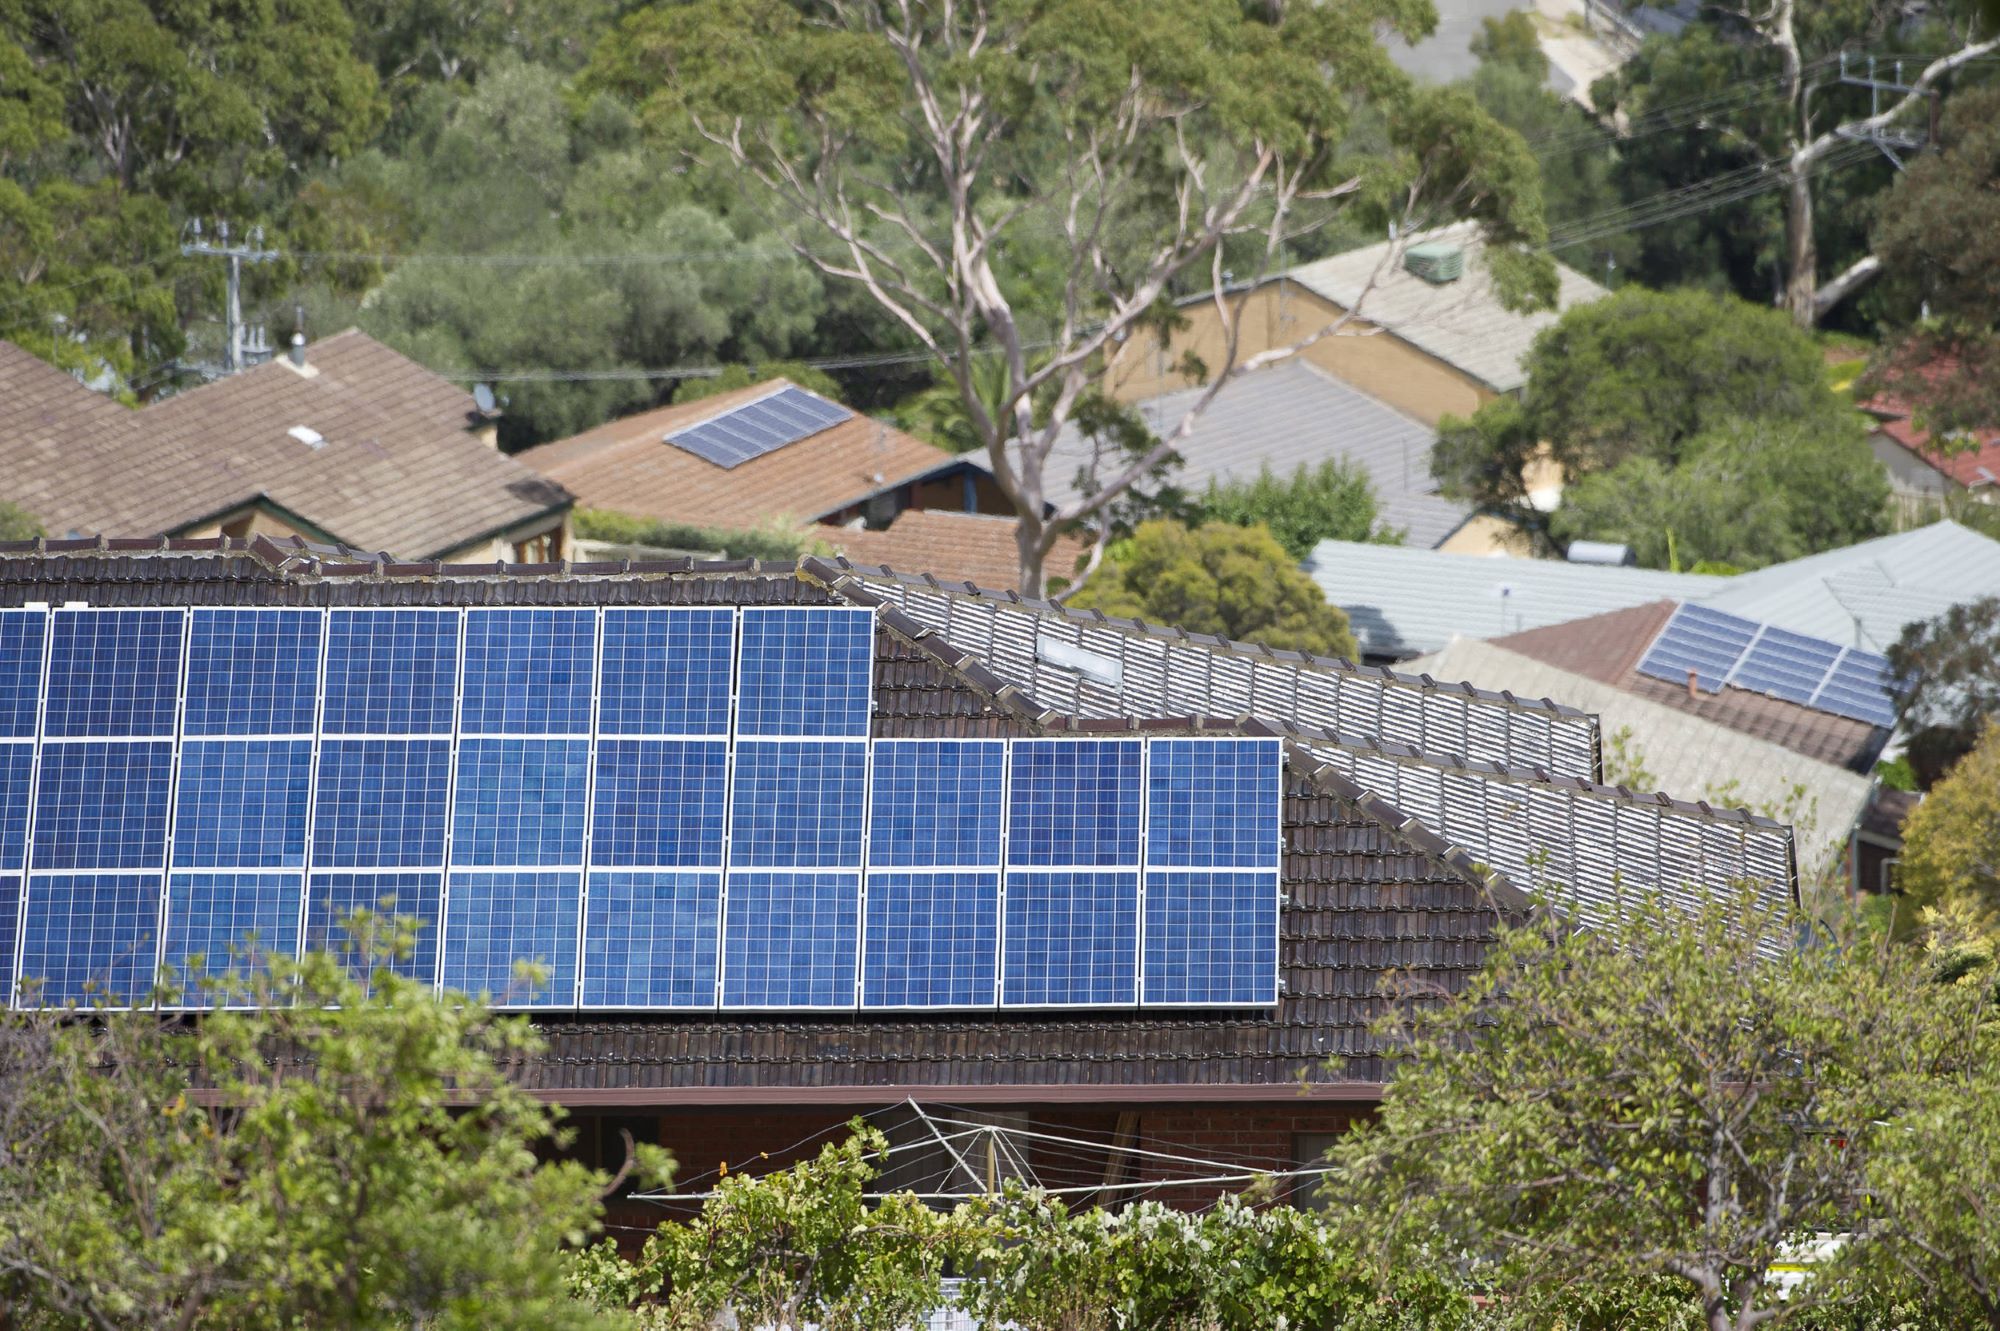 Aerial view of multiple solar panels on the roof of residential house